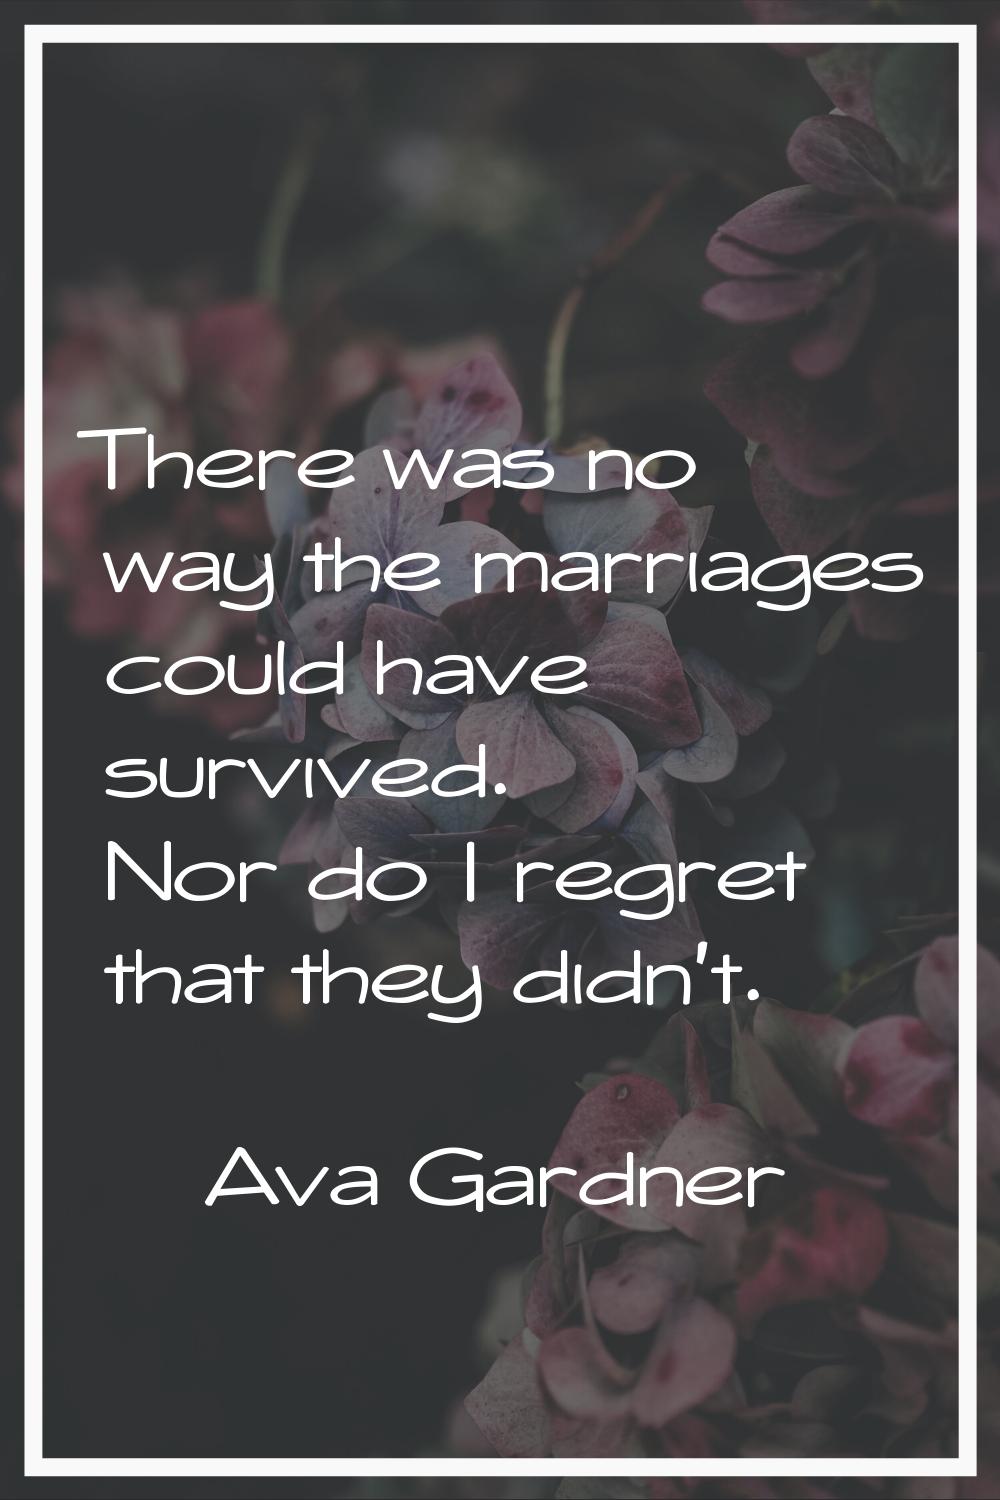 There was no way the marriages could have survived. Nor do I regret that they didn't.